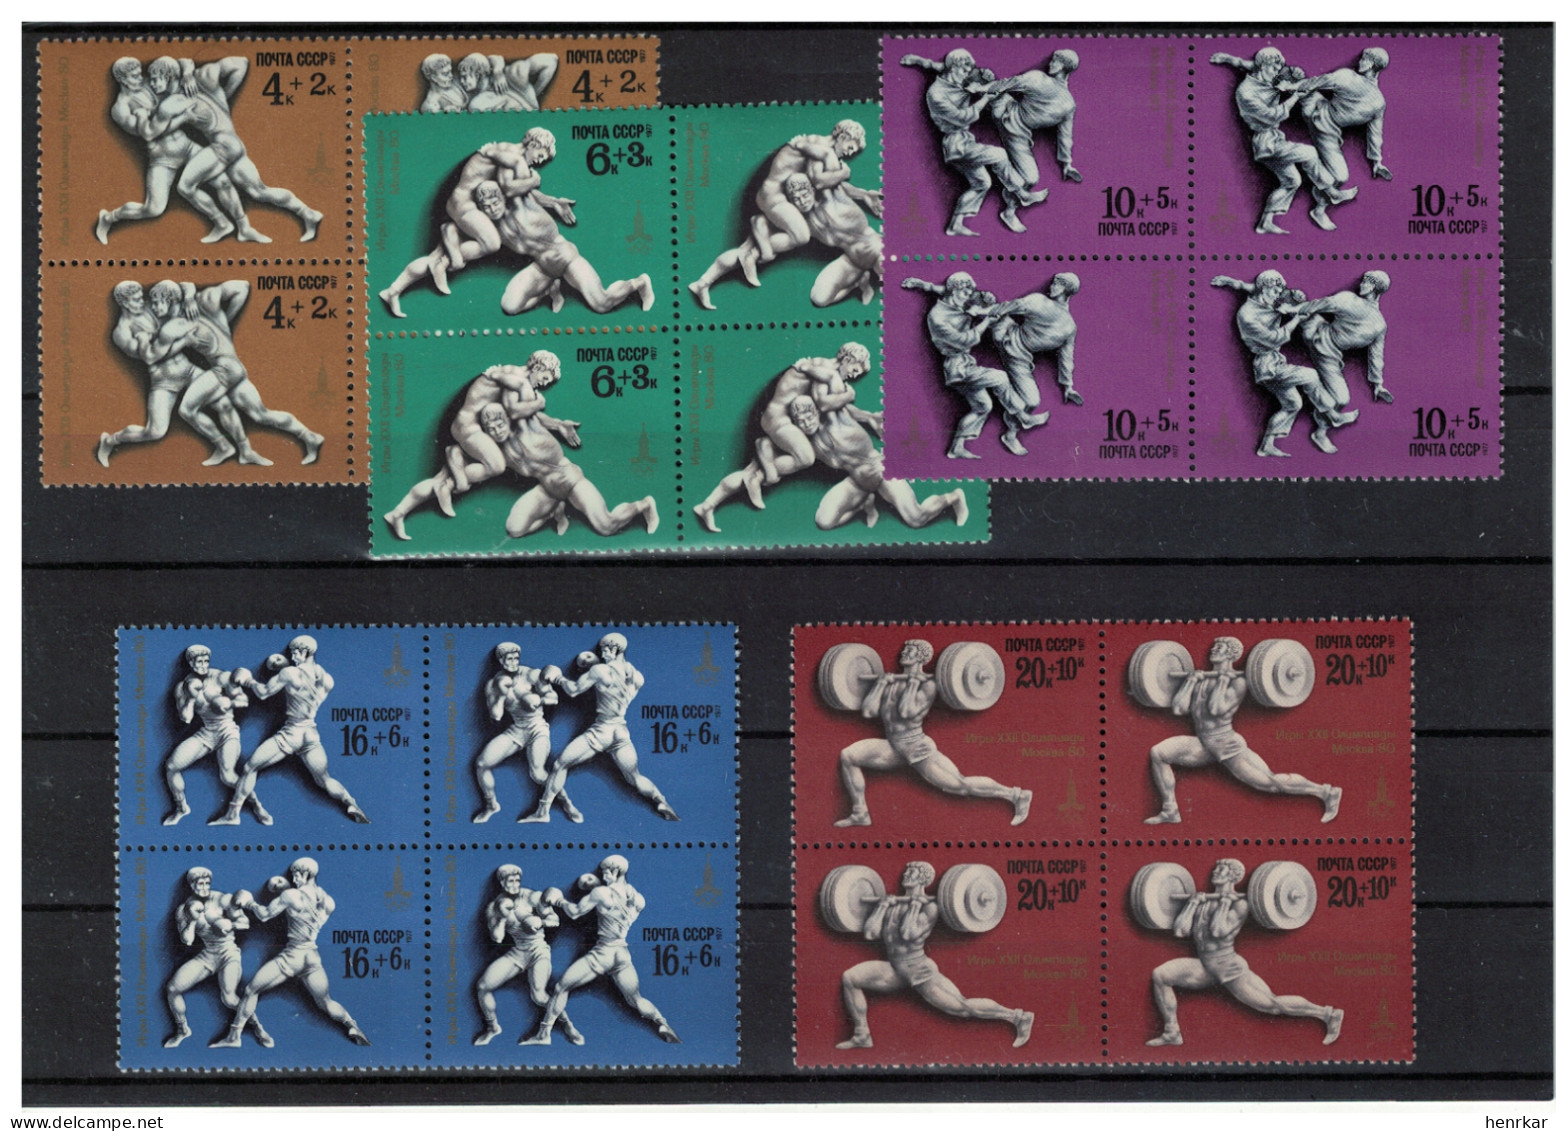 Russia 1977 Olympic Games Moscow 80, Blocks Of 4 MNH OG - Unused Stamps